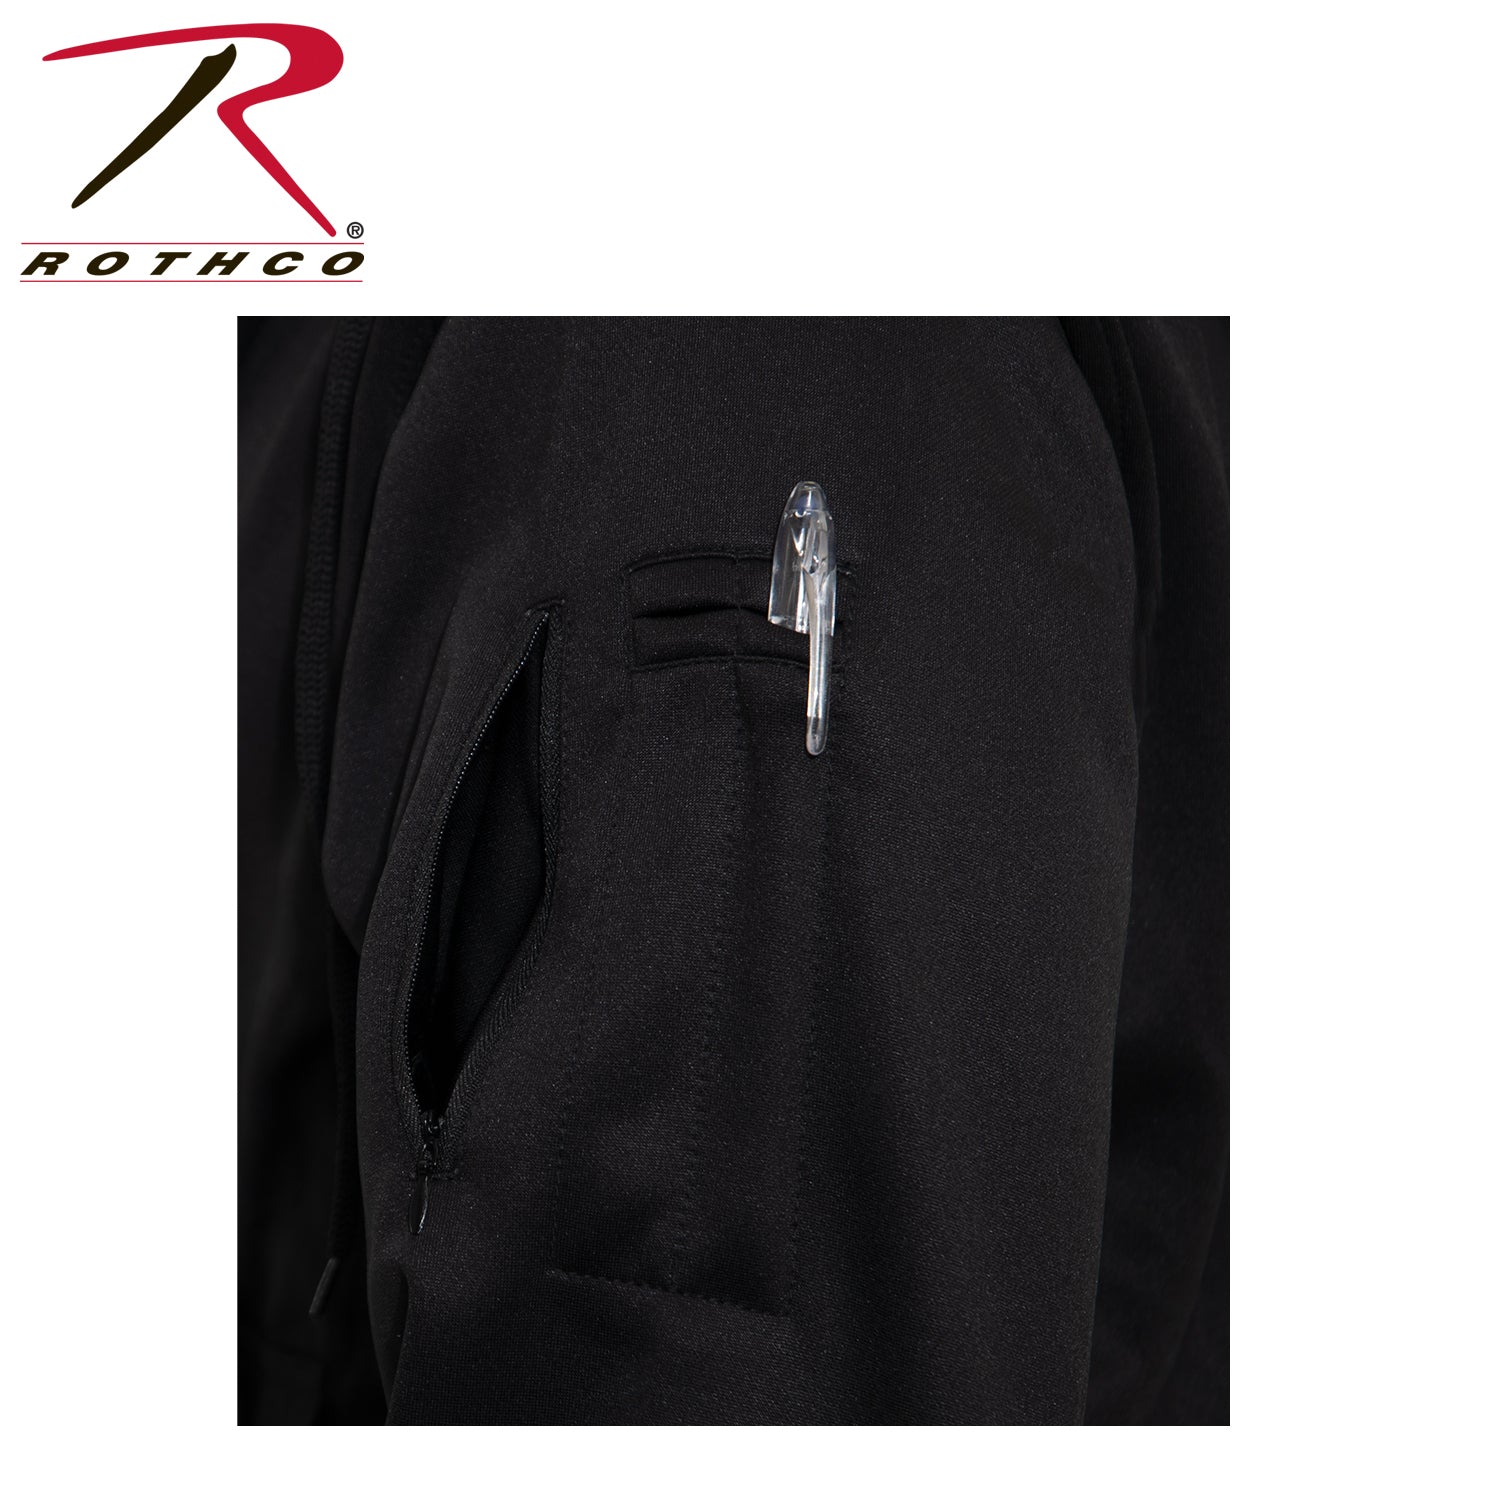 Rothco Thin Blue Line Concealed Carry Zippered Hoodie